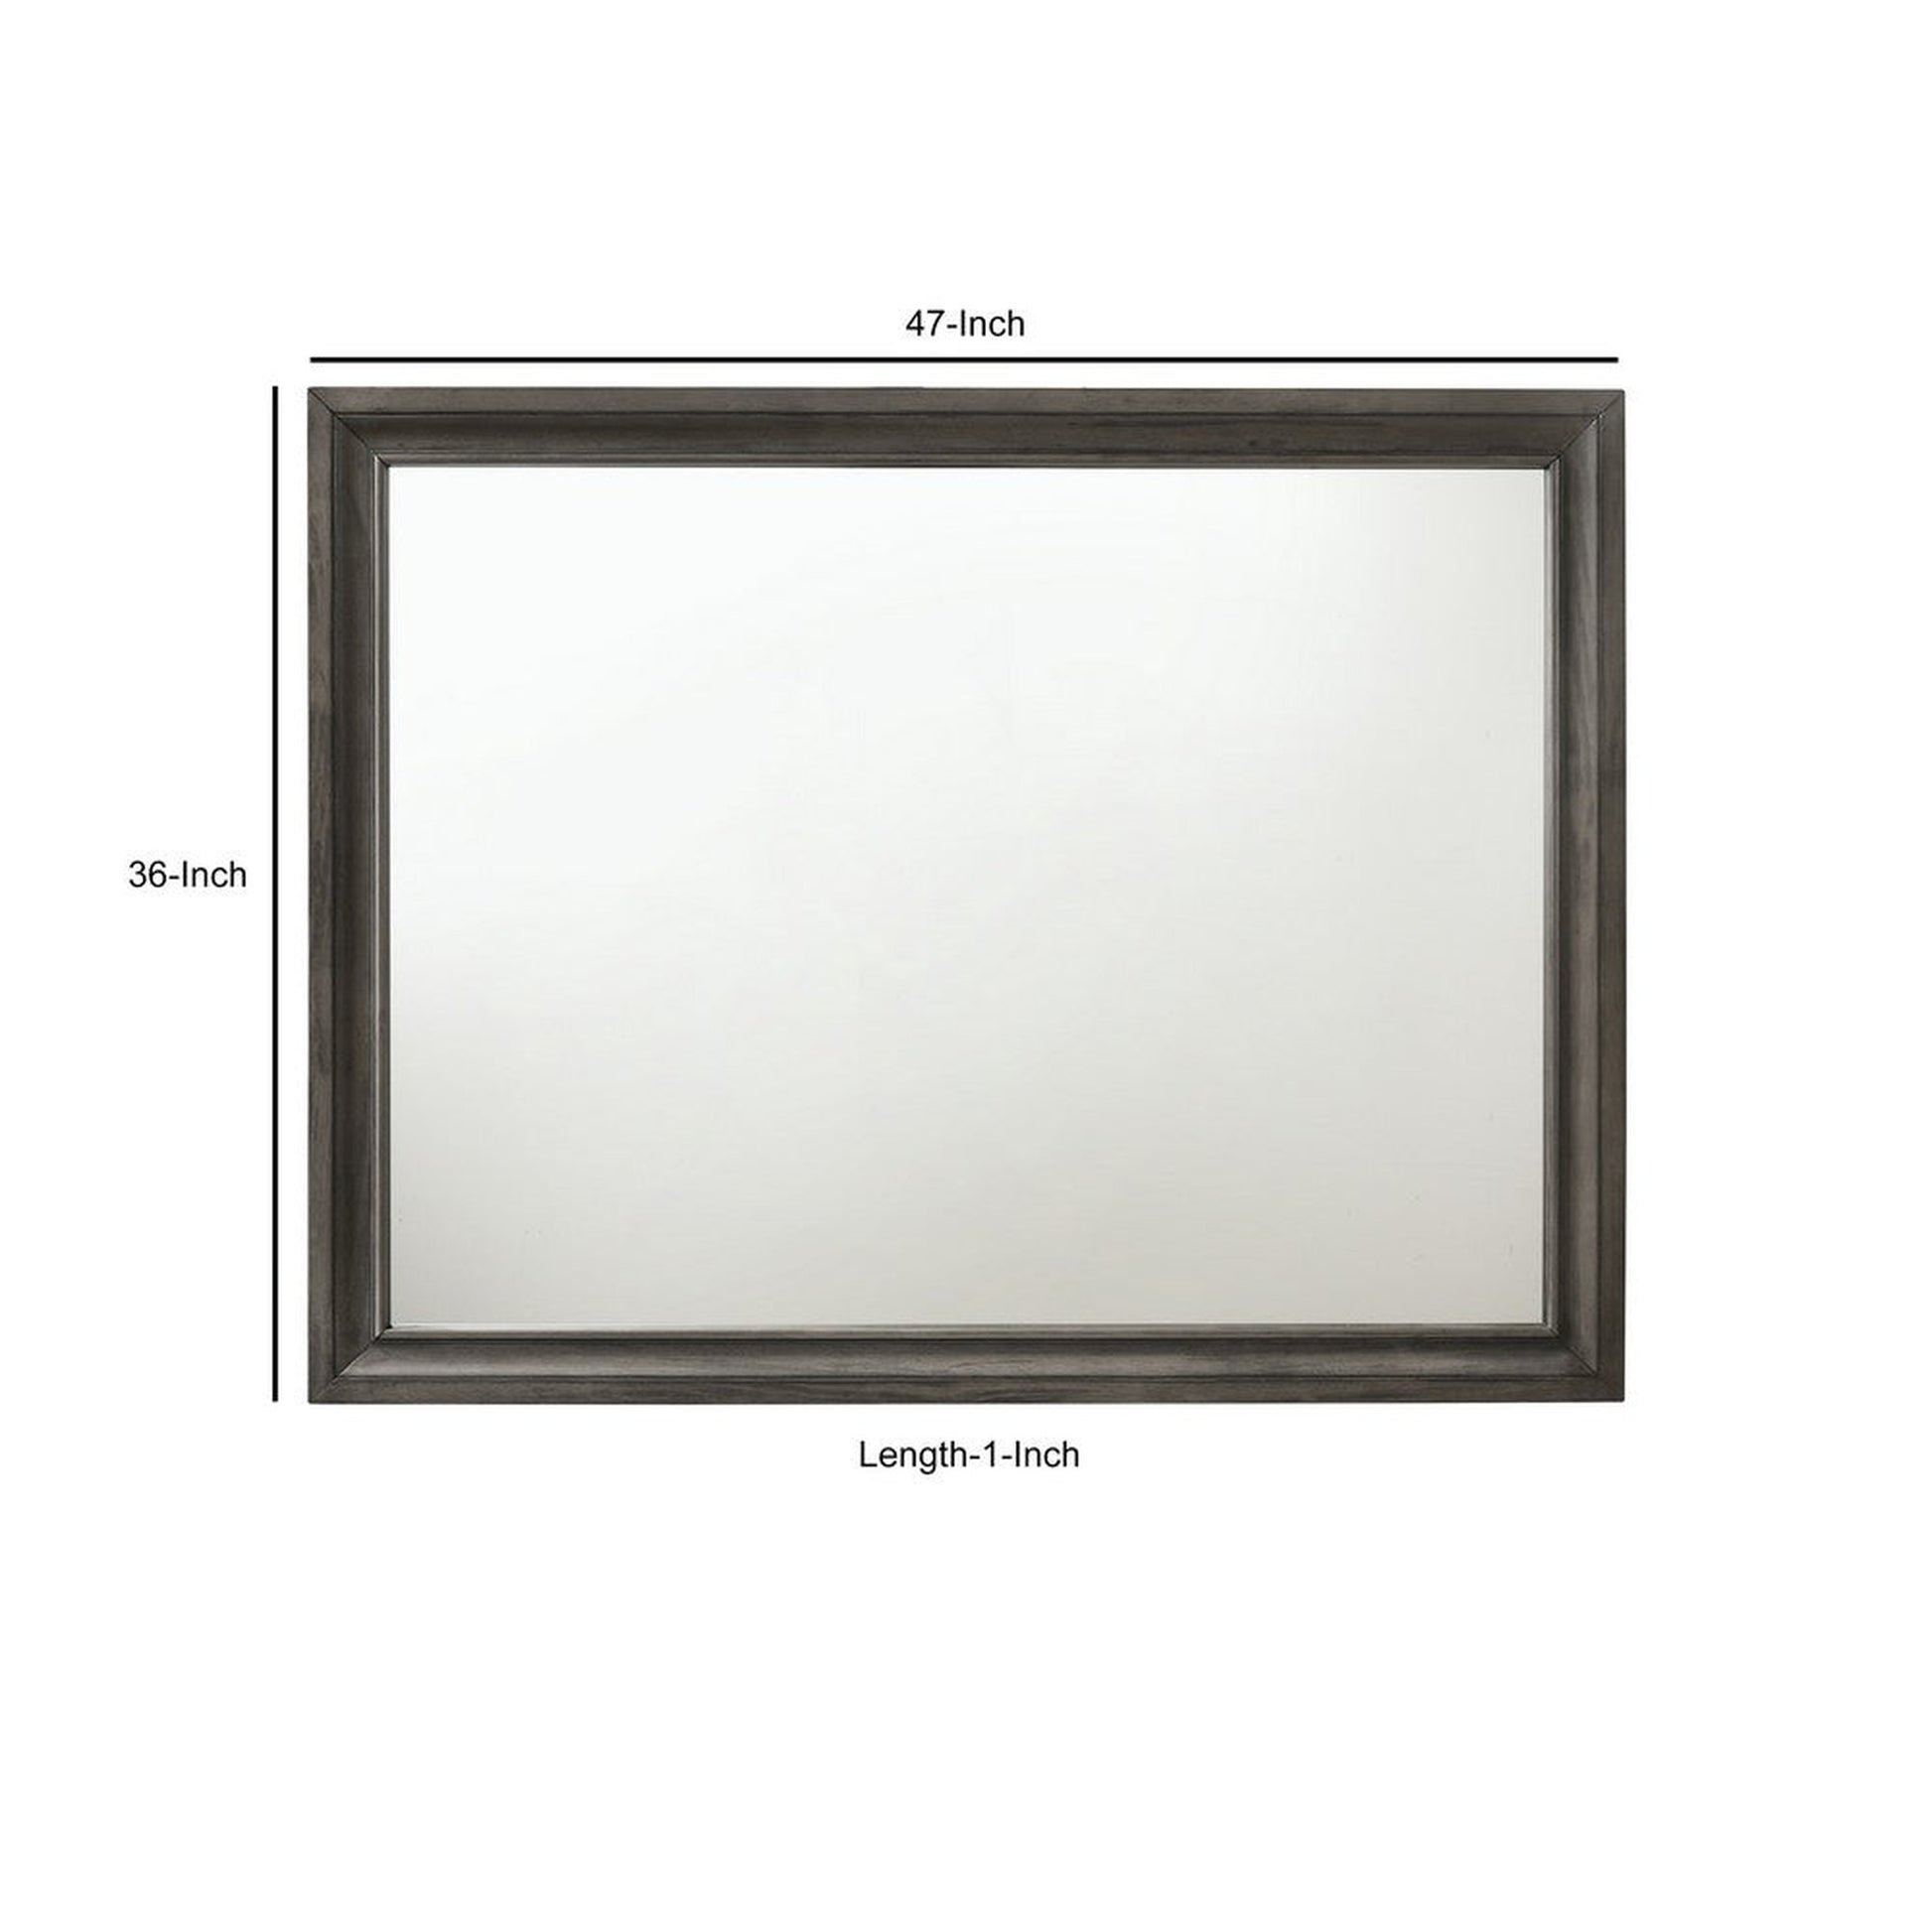 Benzara Gray Transitional Style Wooden Decorative Mirror With Beveled Edges